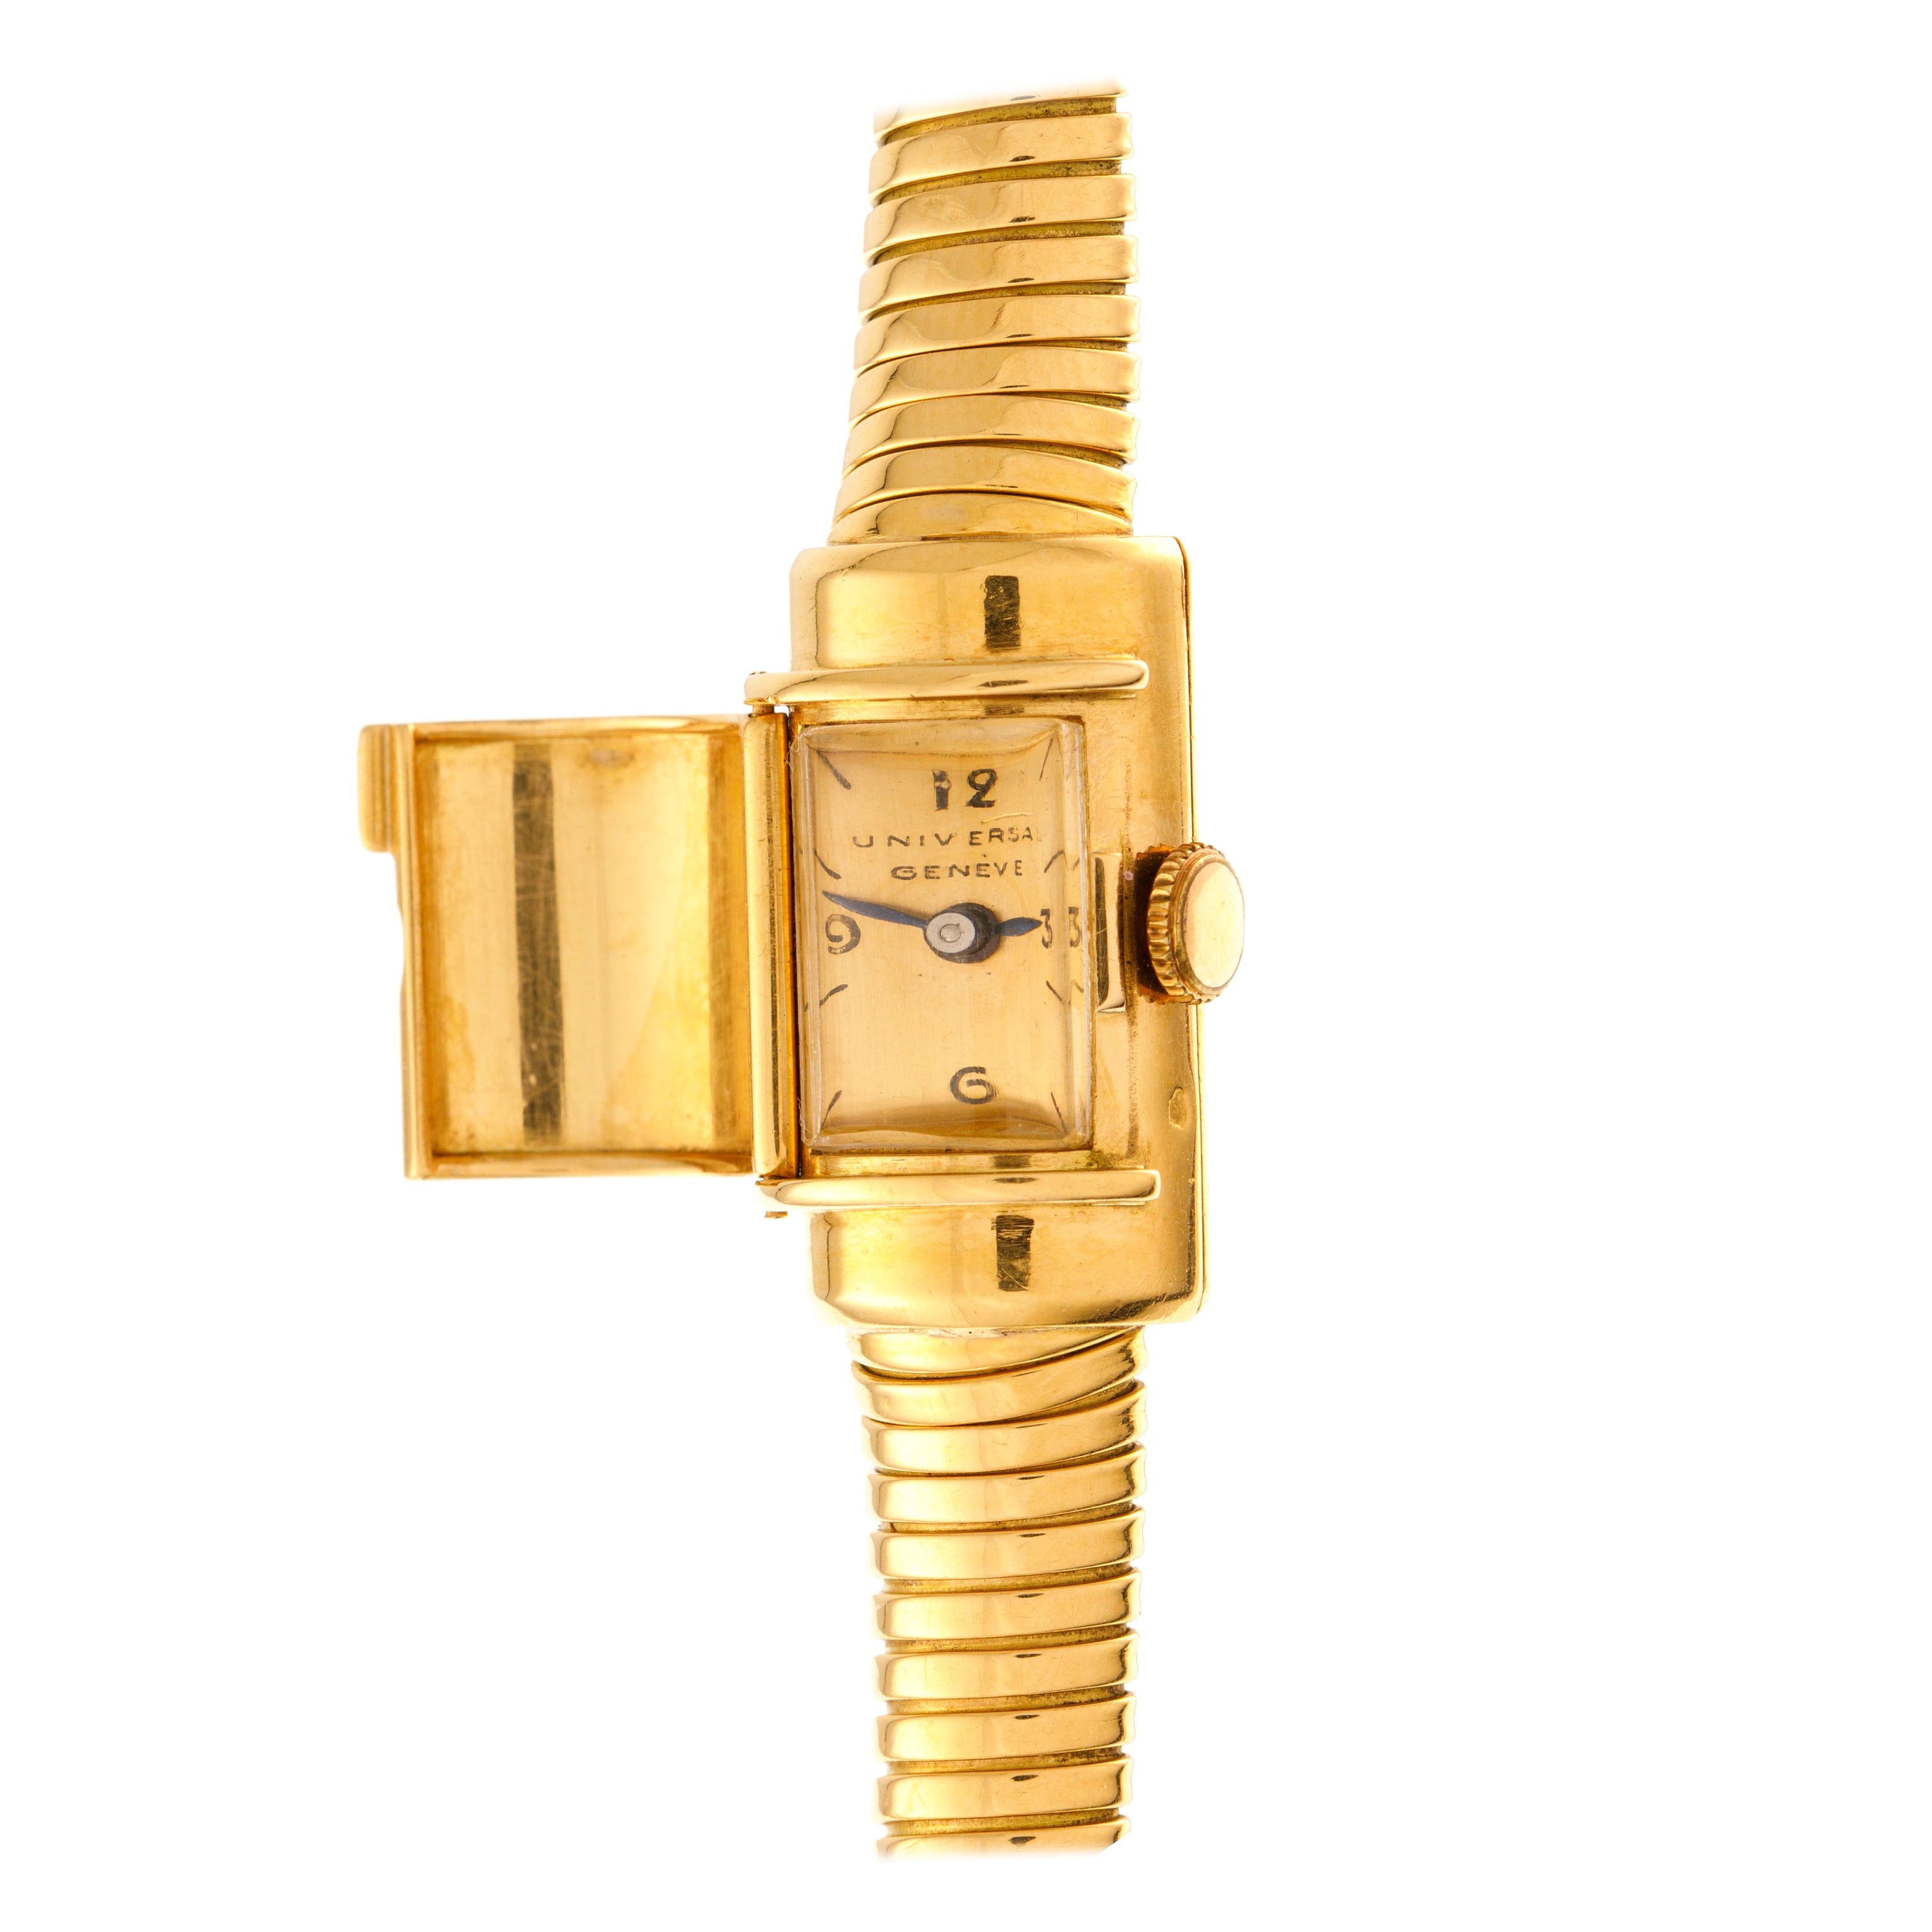 Universal Genève Lady Wrist Watch "Capote" Model 18 Carat Yellow Gold For Sale